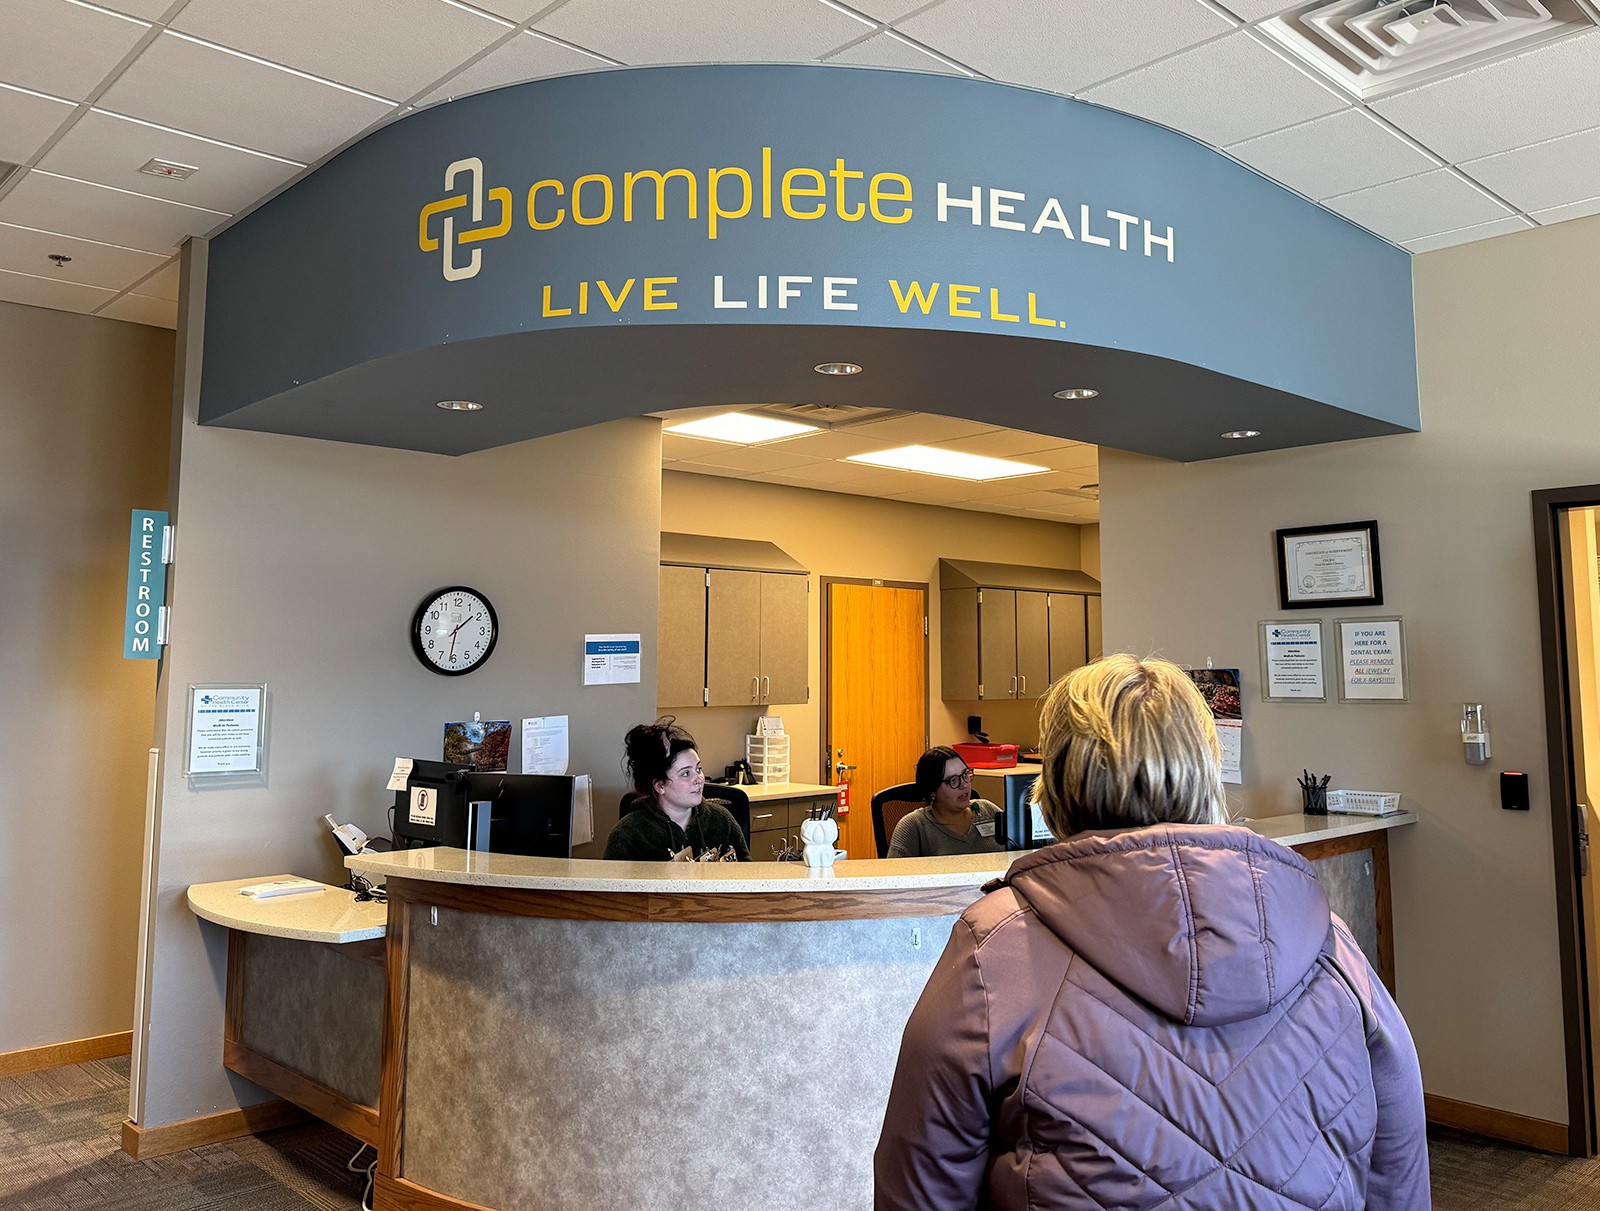 Complete Health Dental Check-in Signage